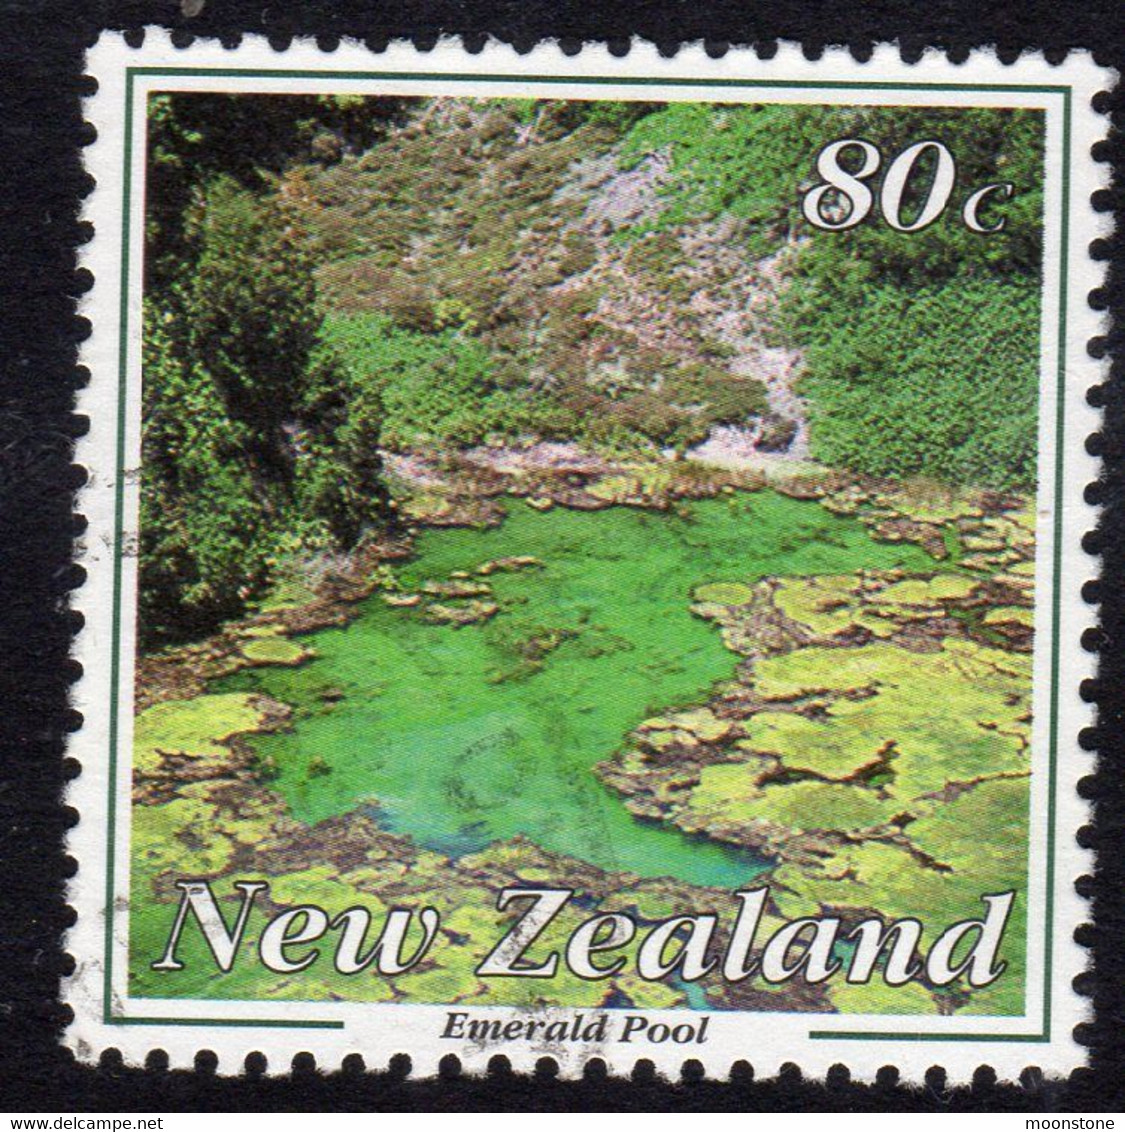 New Zealand 1993 Thermal Wonders 80c Value, Used, SG 1732 - Gebraucht